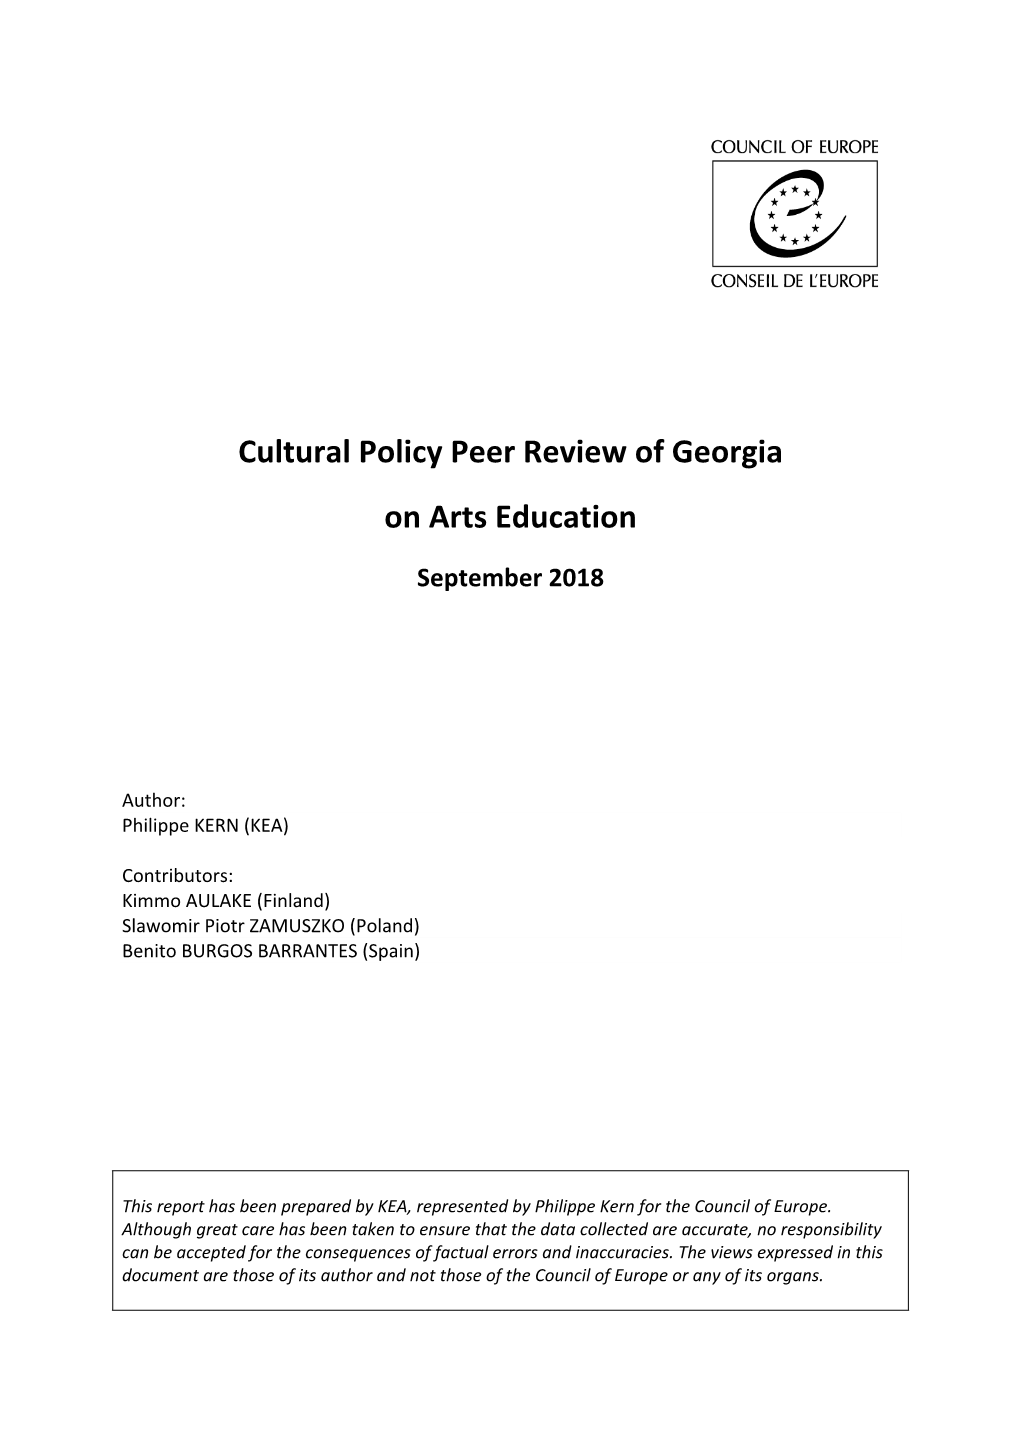 Cultural Policy Peer Review of Georgia on Arts Education